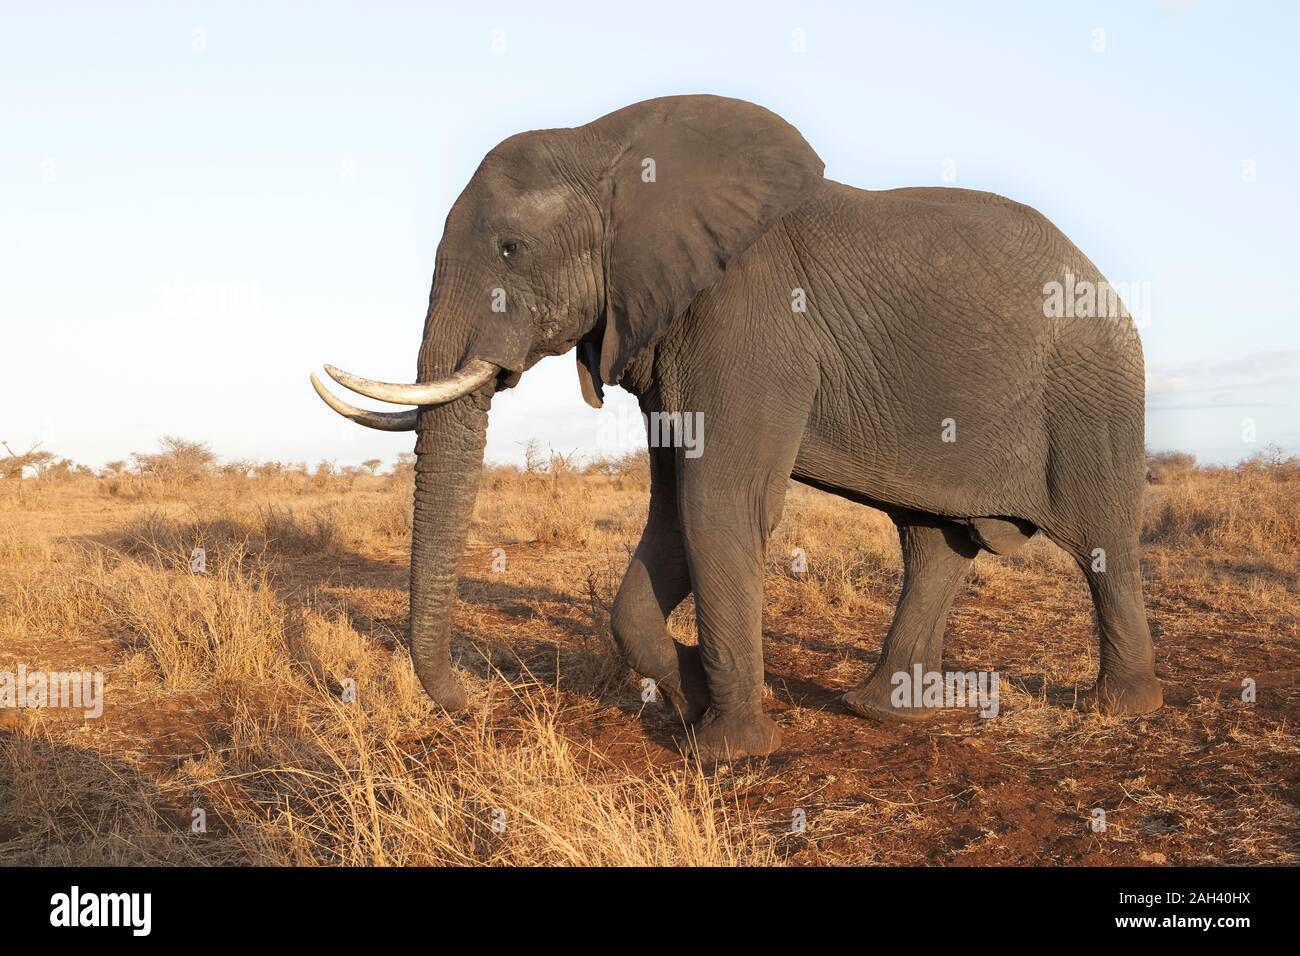 African elephant, Kruger National Park, South Africa Stock Photo